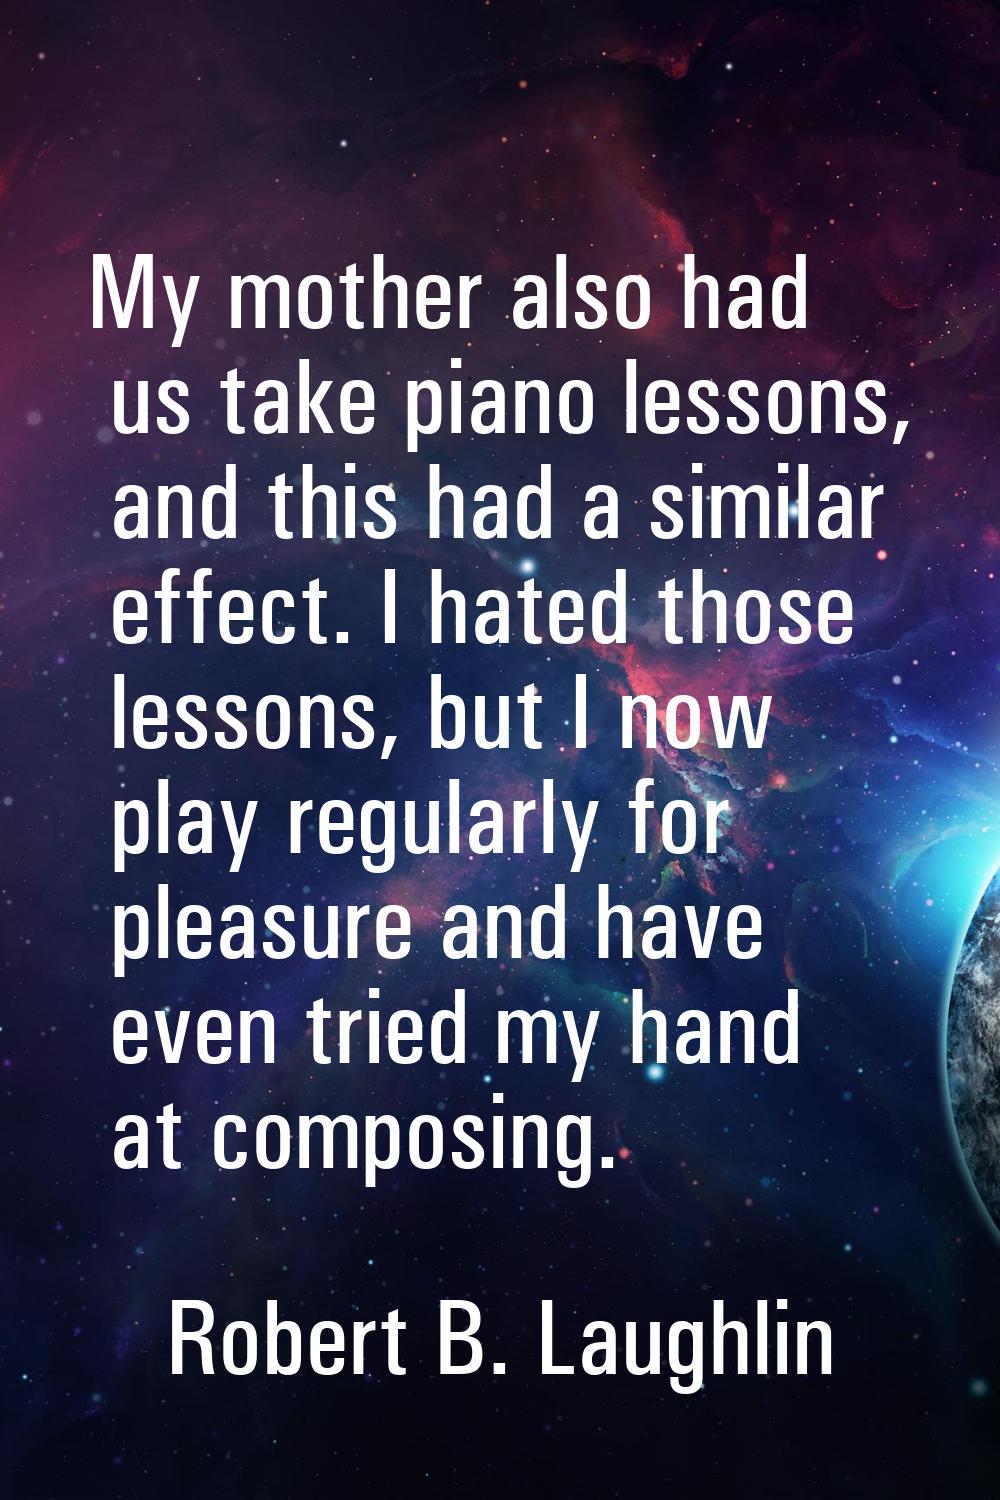 My mother also had us take piano lessons, and this had a similar effect. I hated those lessons, but